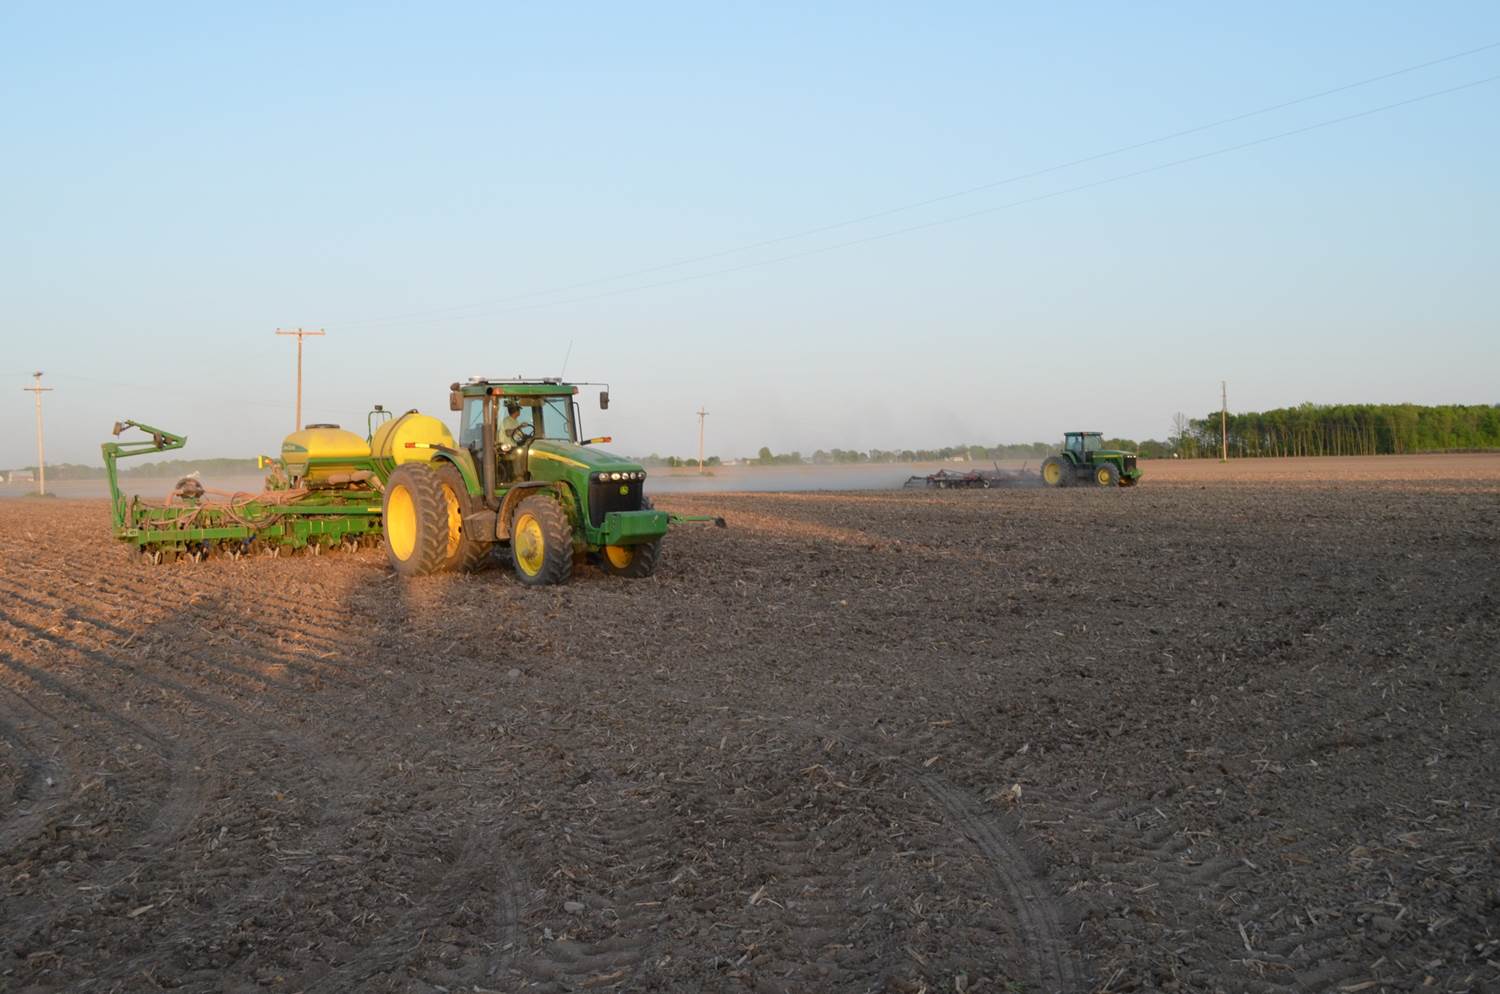 JD 8100 MFWD fitting ground in front of JD 8320 and JD 1790 planter